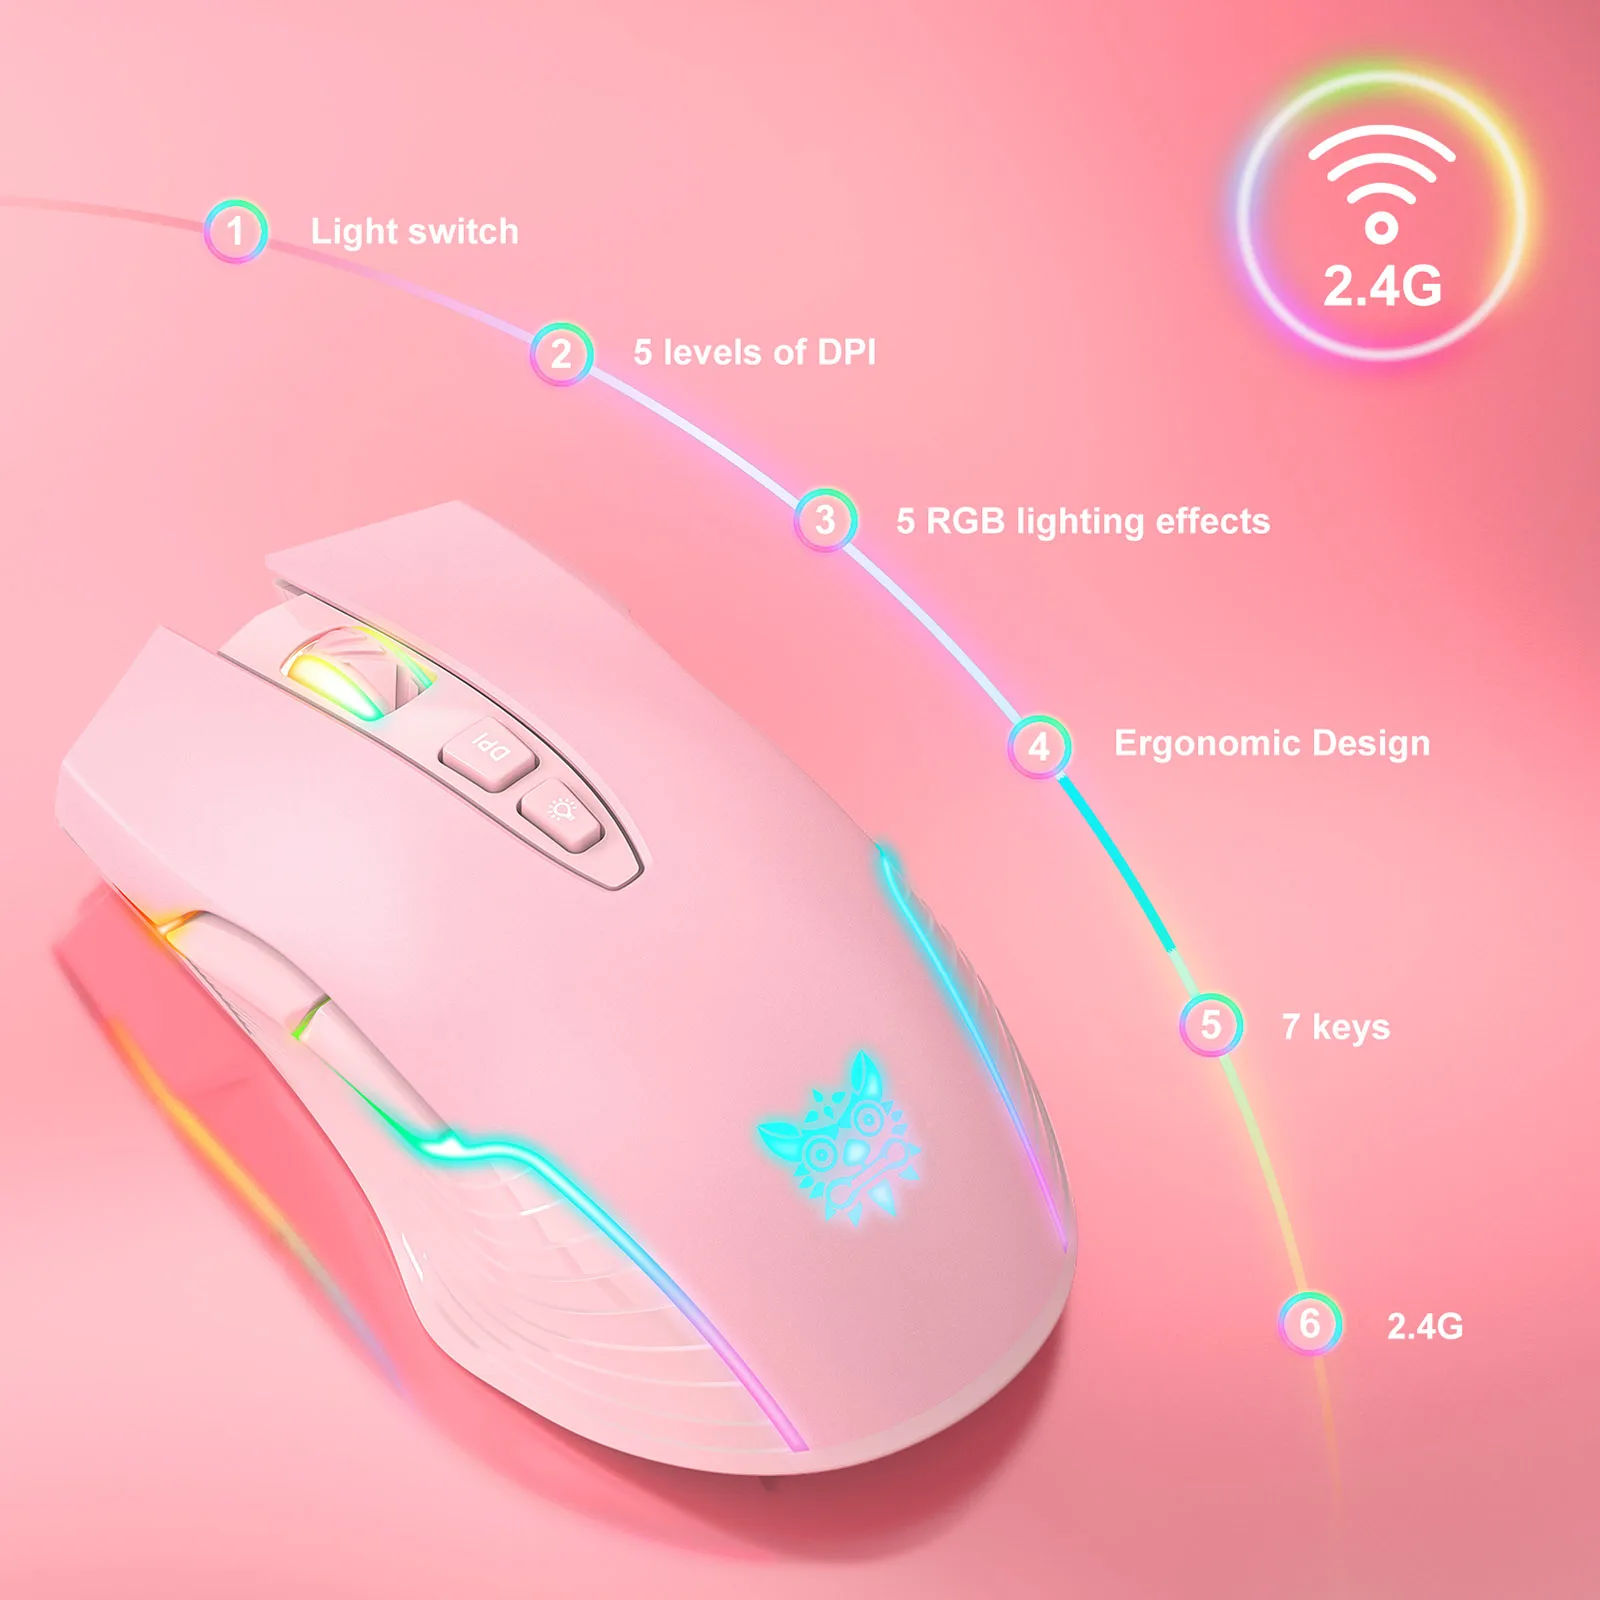 ONIKUMA 2.4G Wireless Gaming Mouse RGB Backlit E-sports Mouse Computer Mice 3600DPI with 7 Programmable Buttons for Laptop PC wireless mouse